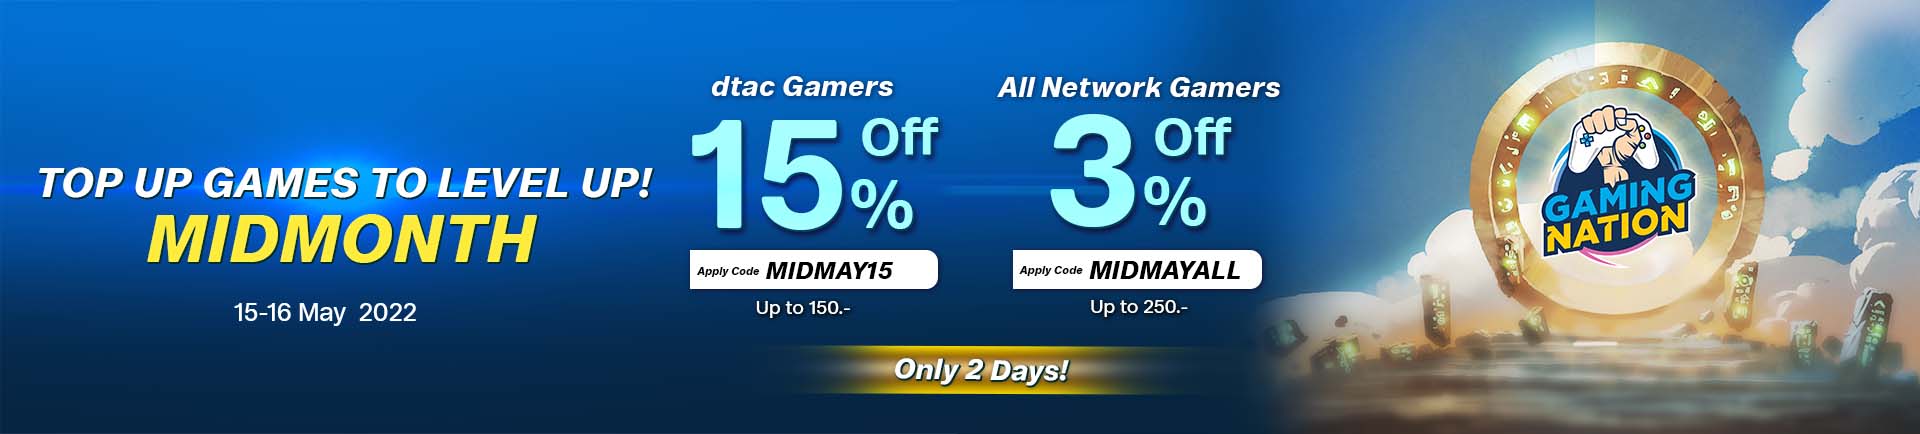 MID MONTH DEALS. TOP-UP GAMES TO LEVEL UP!